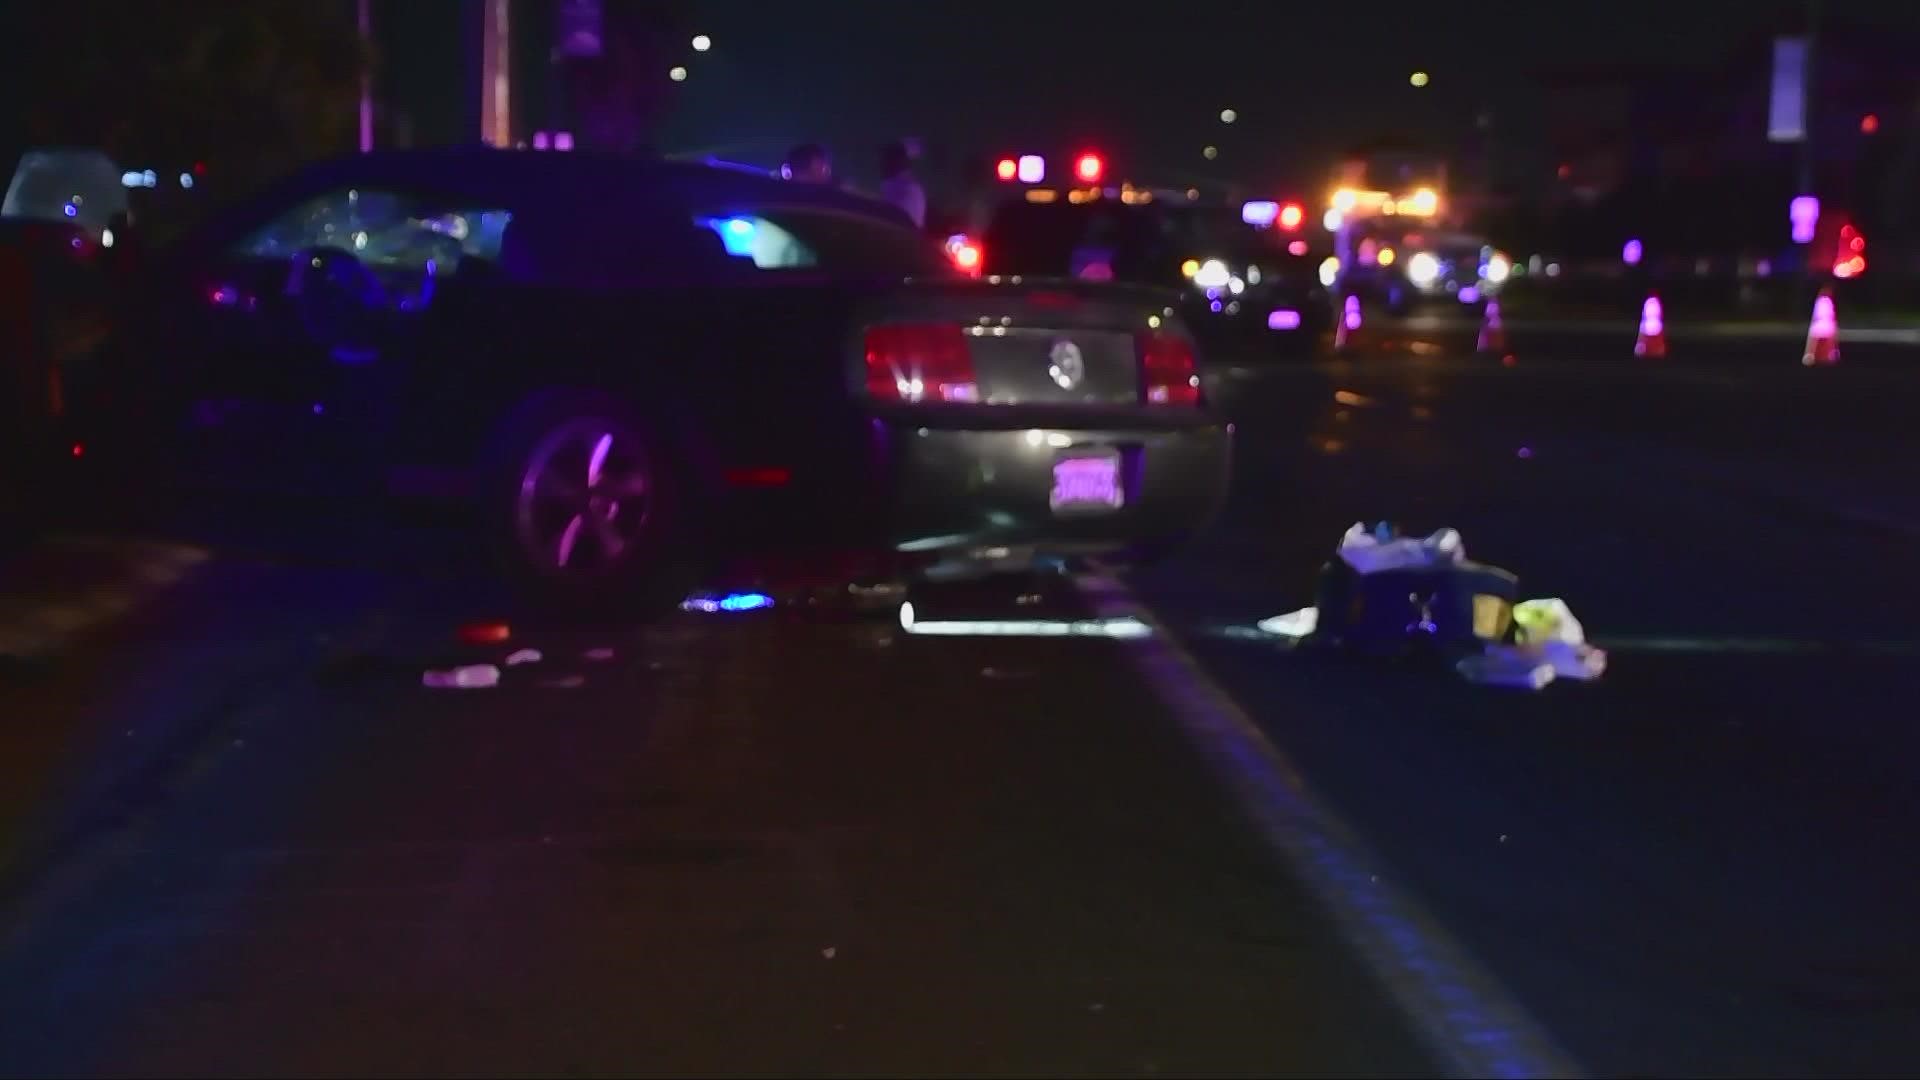 Investigators believe the person who crashed into the CHP officer was under the influence at the time of the crash.